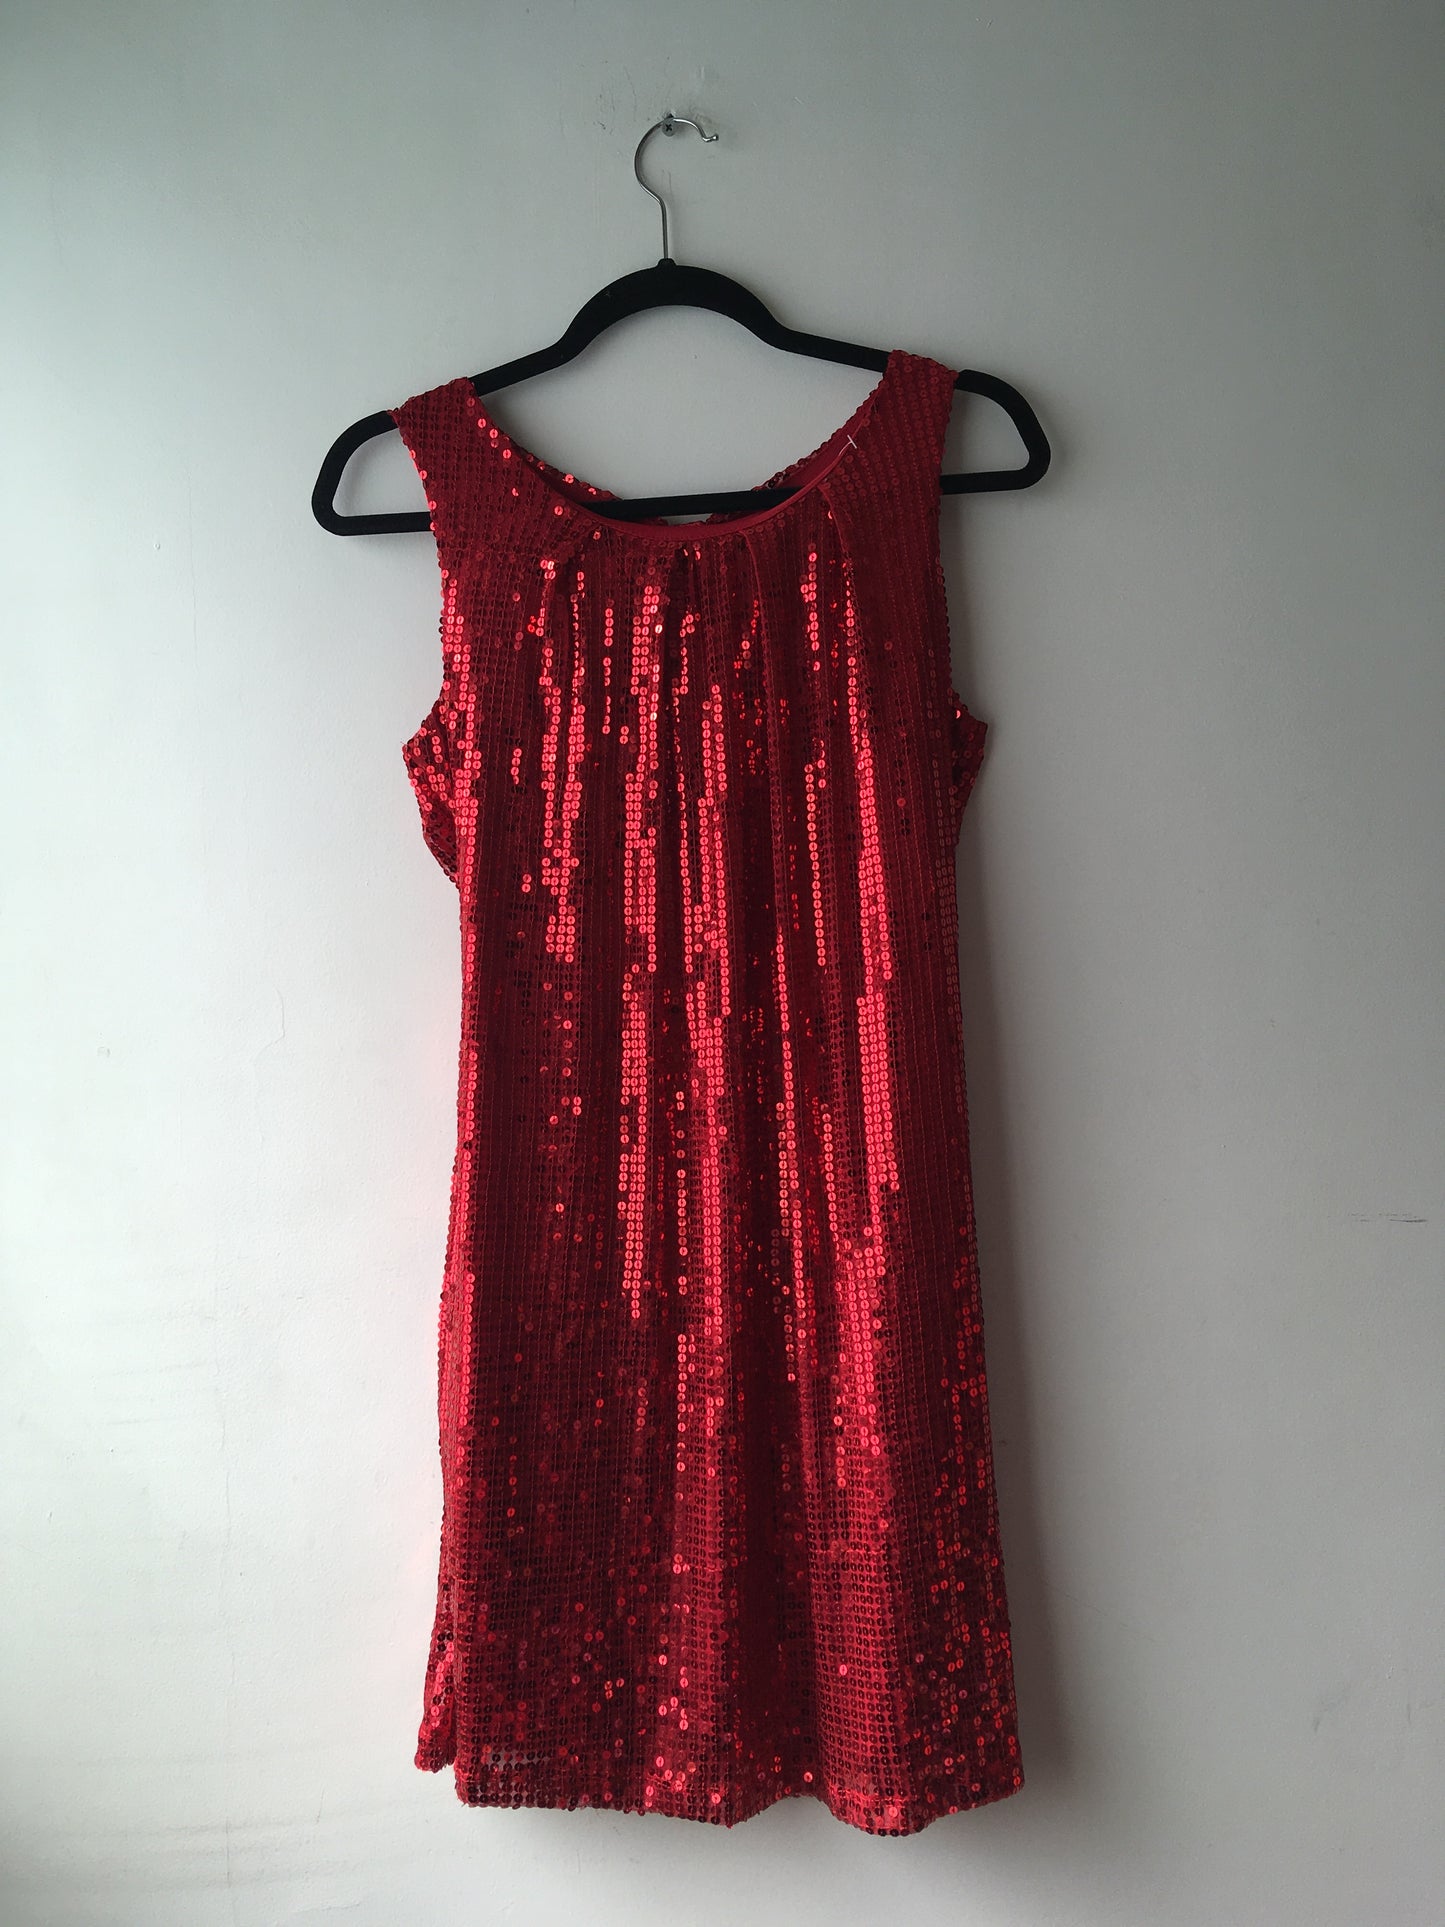 sequined dress